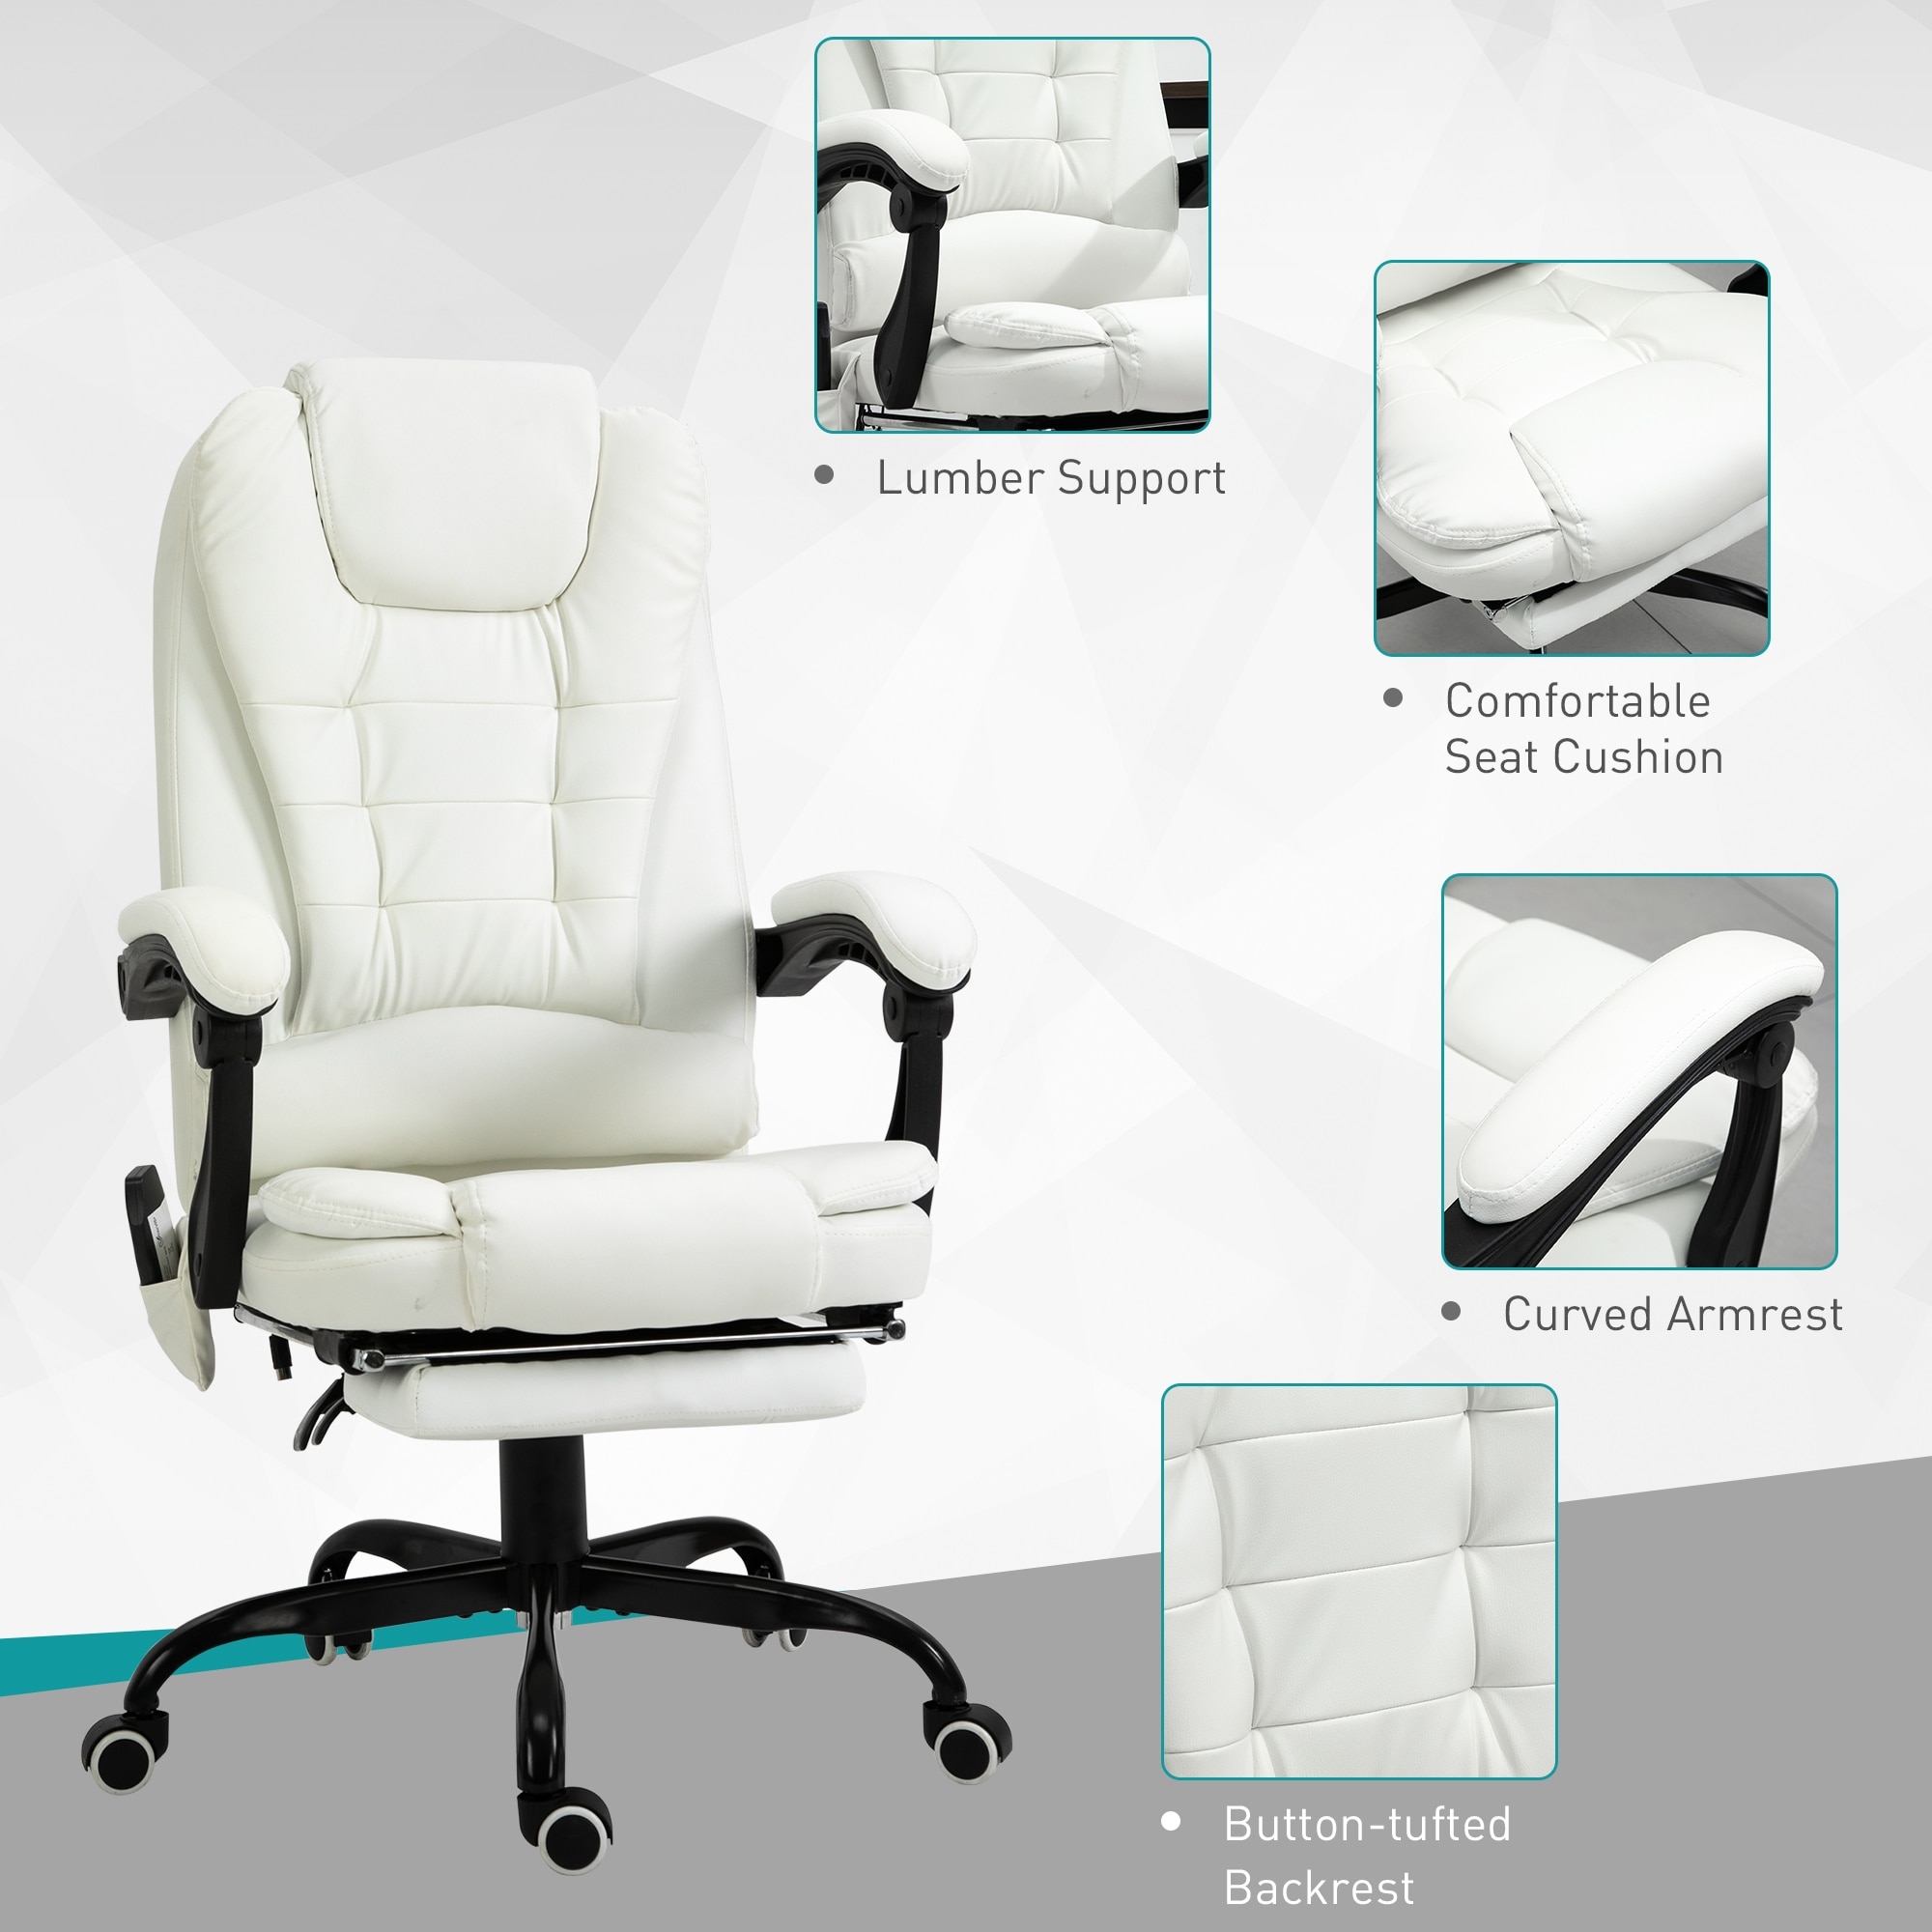 https://ak1.ostkcdn.com/images/products/is/images/direct/931821daf6049220a4776613876c34a94d15ab1f/Vinsetto-7-Point-Vibrating-Massage-Office-Chair-High-Back-Executive-Recliner-with-Lumbar-Support%2C-Footrest%2C-Reclining-Back.jpg